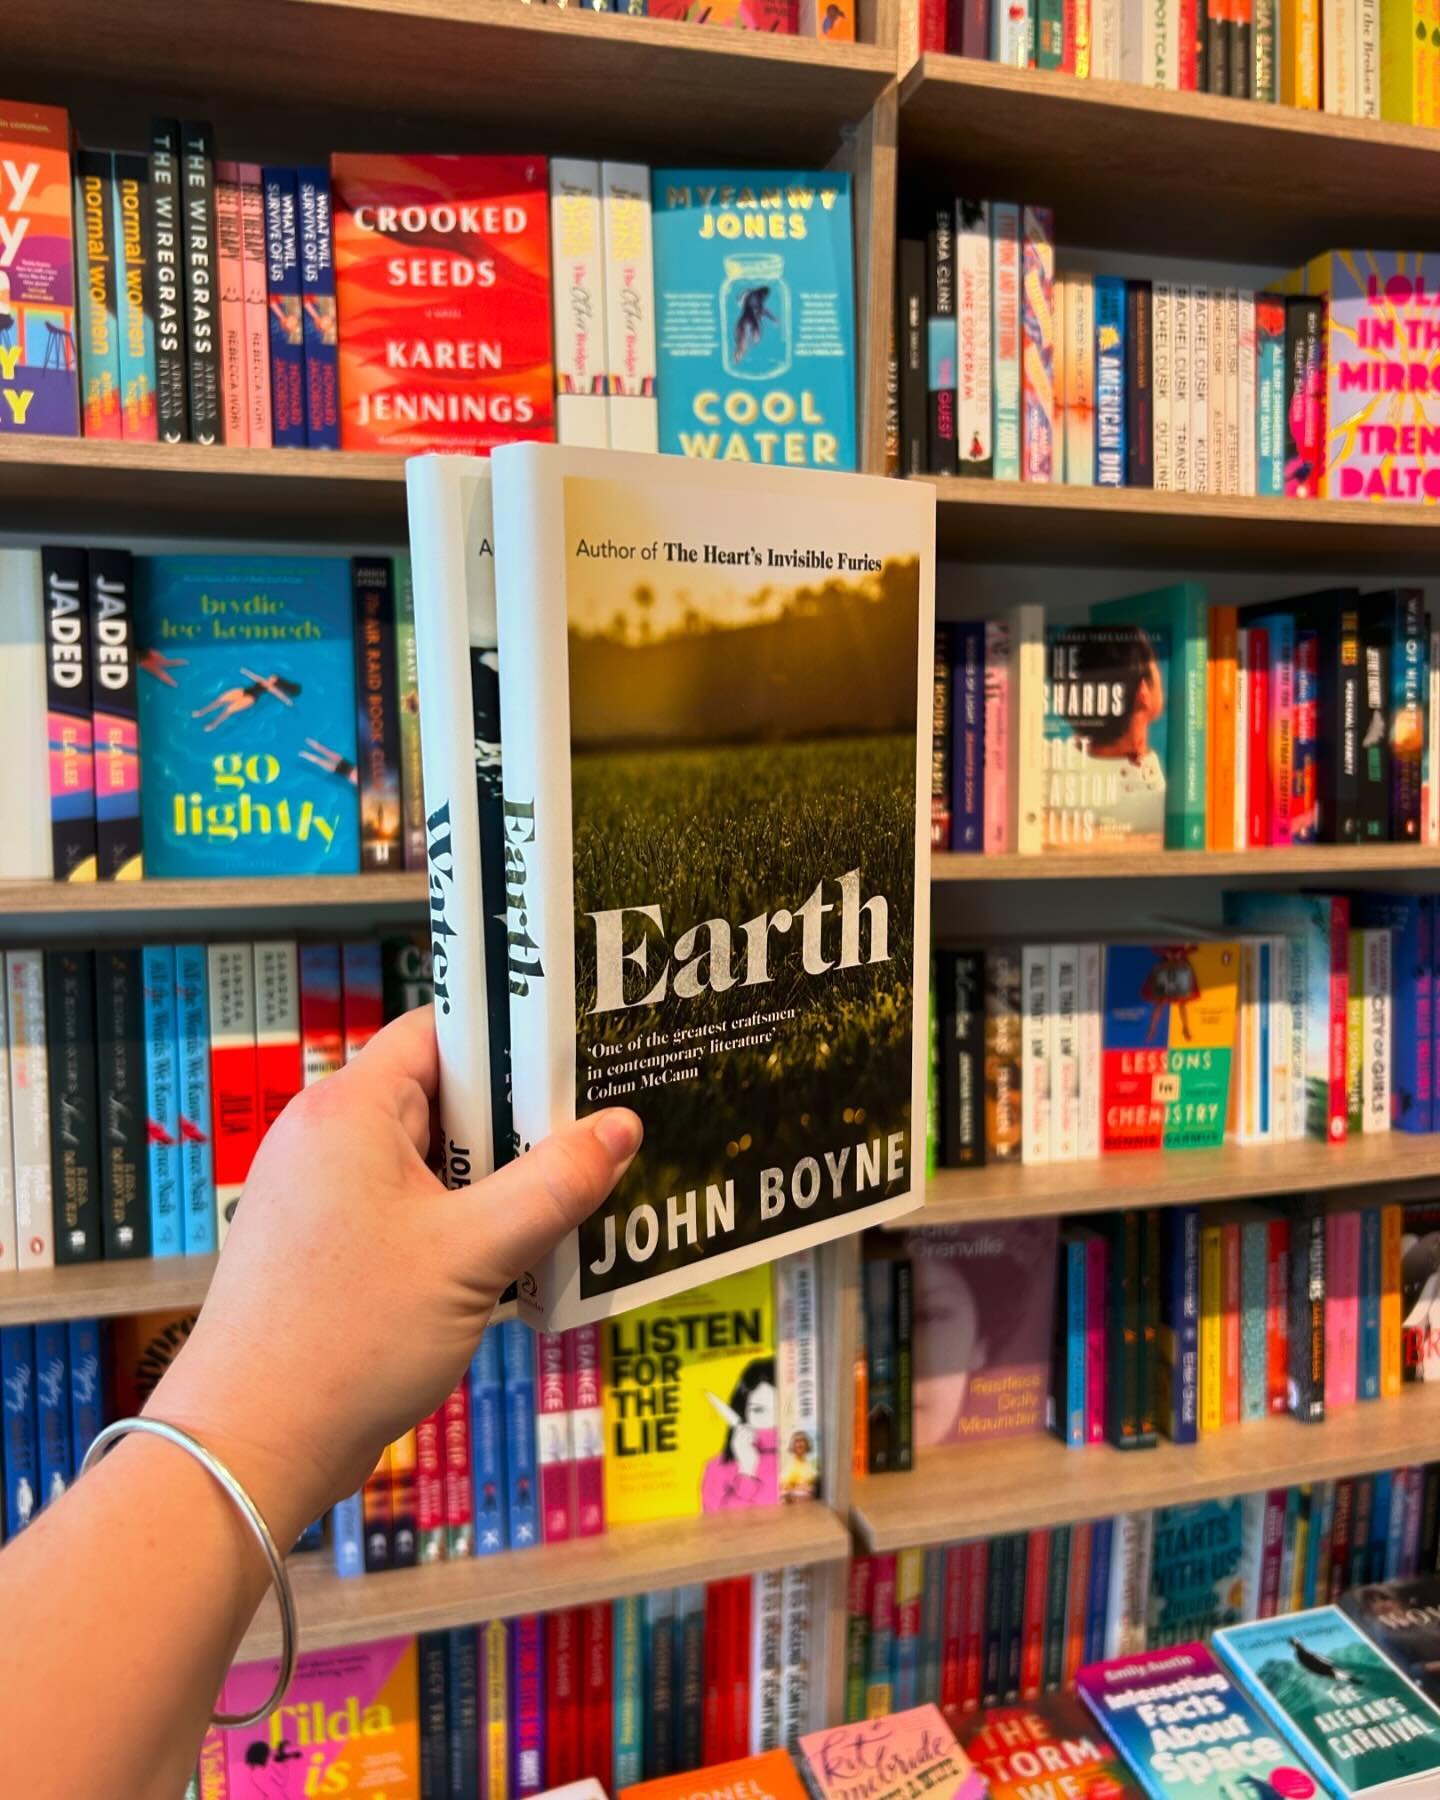 The second instalment of John Boyne&rsquo;s quartet of interlinked novels has arrived, Earth, where once again Boyne takes readers into the complex, dark and shocking places that might lurk within a human heart. 🌱❤️

Together these novellas will mak